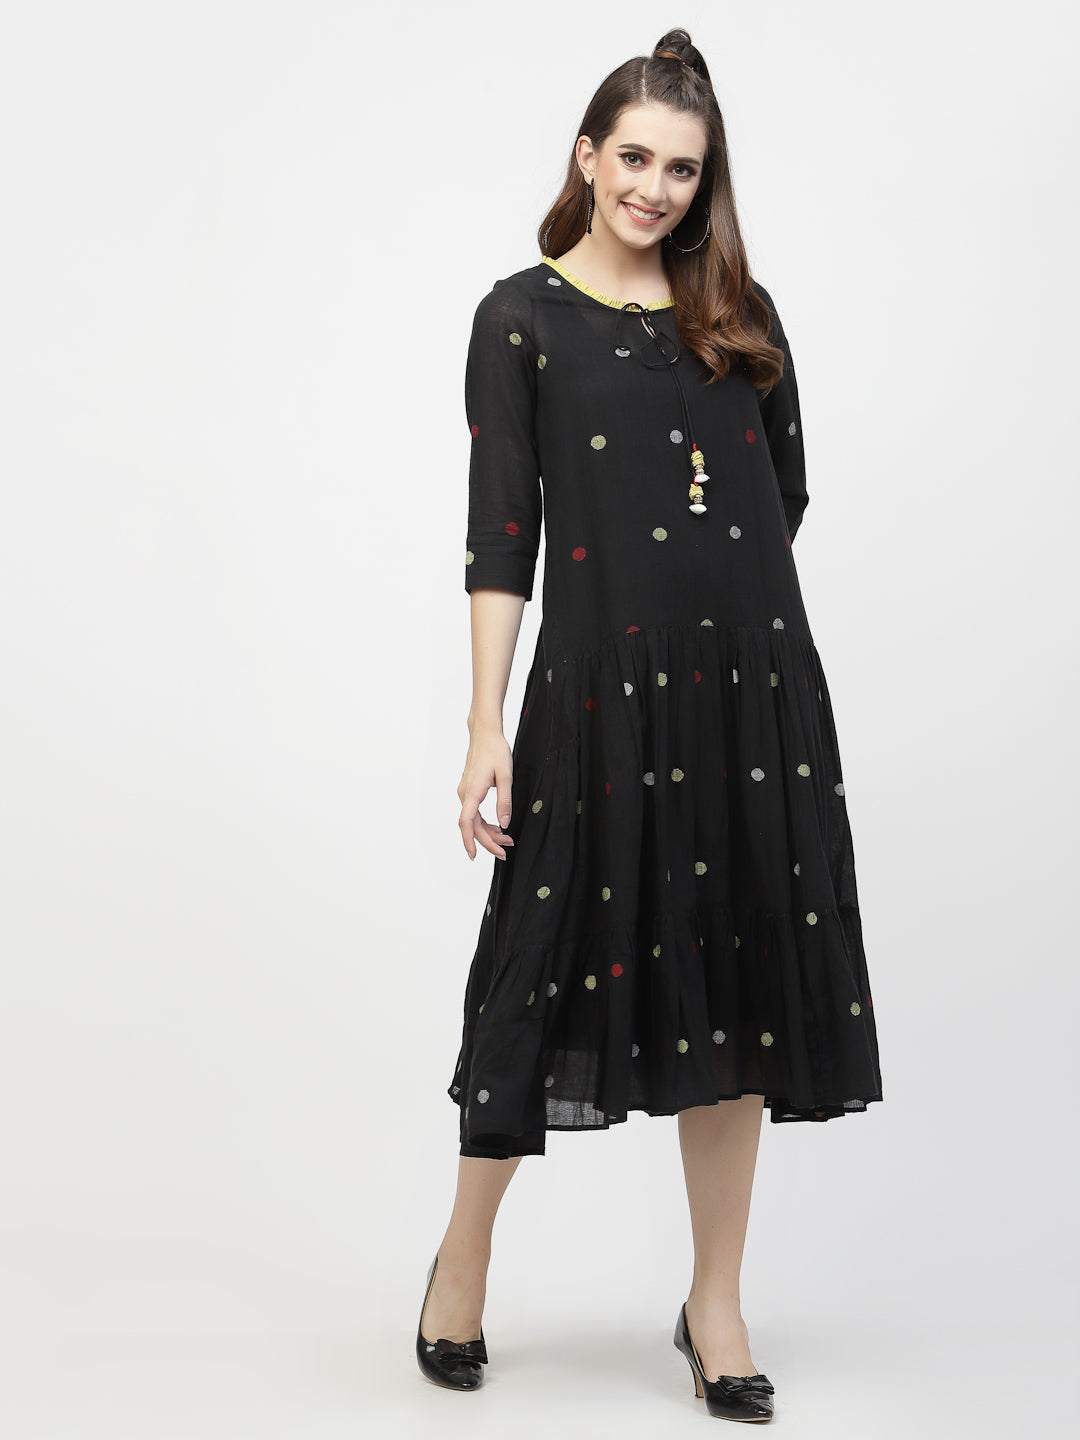 Terquois Self Design Black Polka Design Casual Dress with Ruffle Tie-up Neck Dresses TERQUOIS   